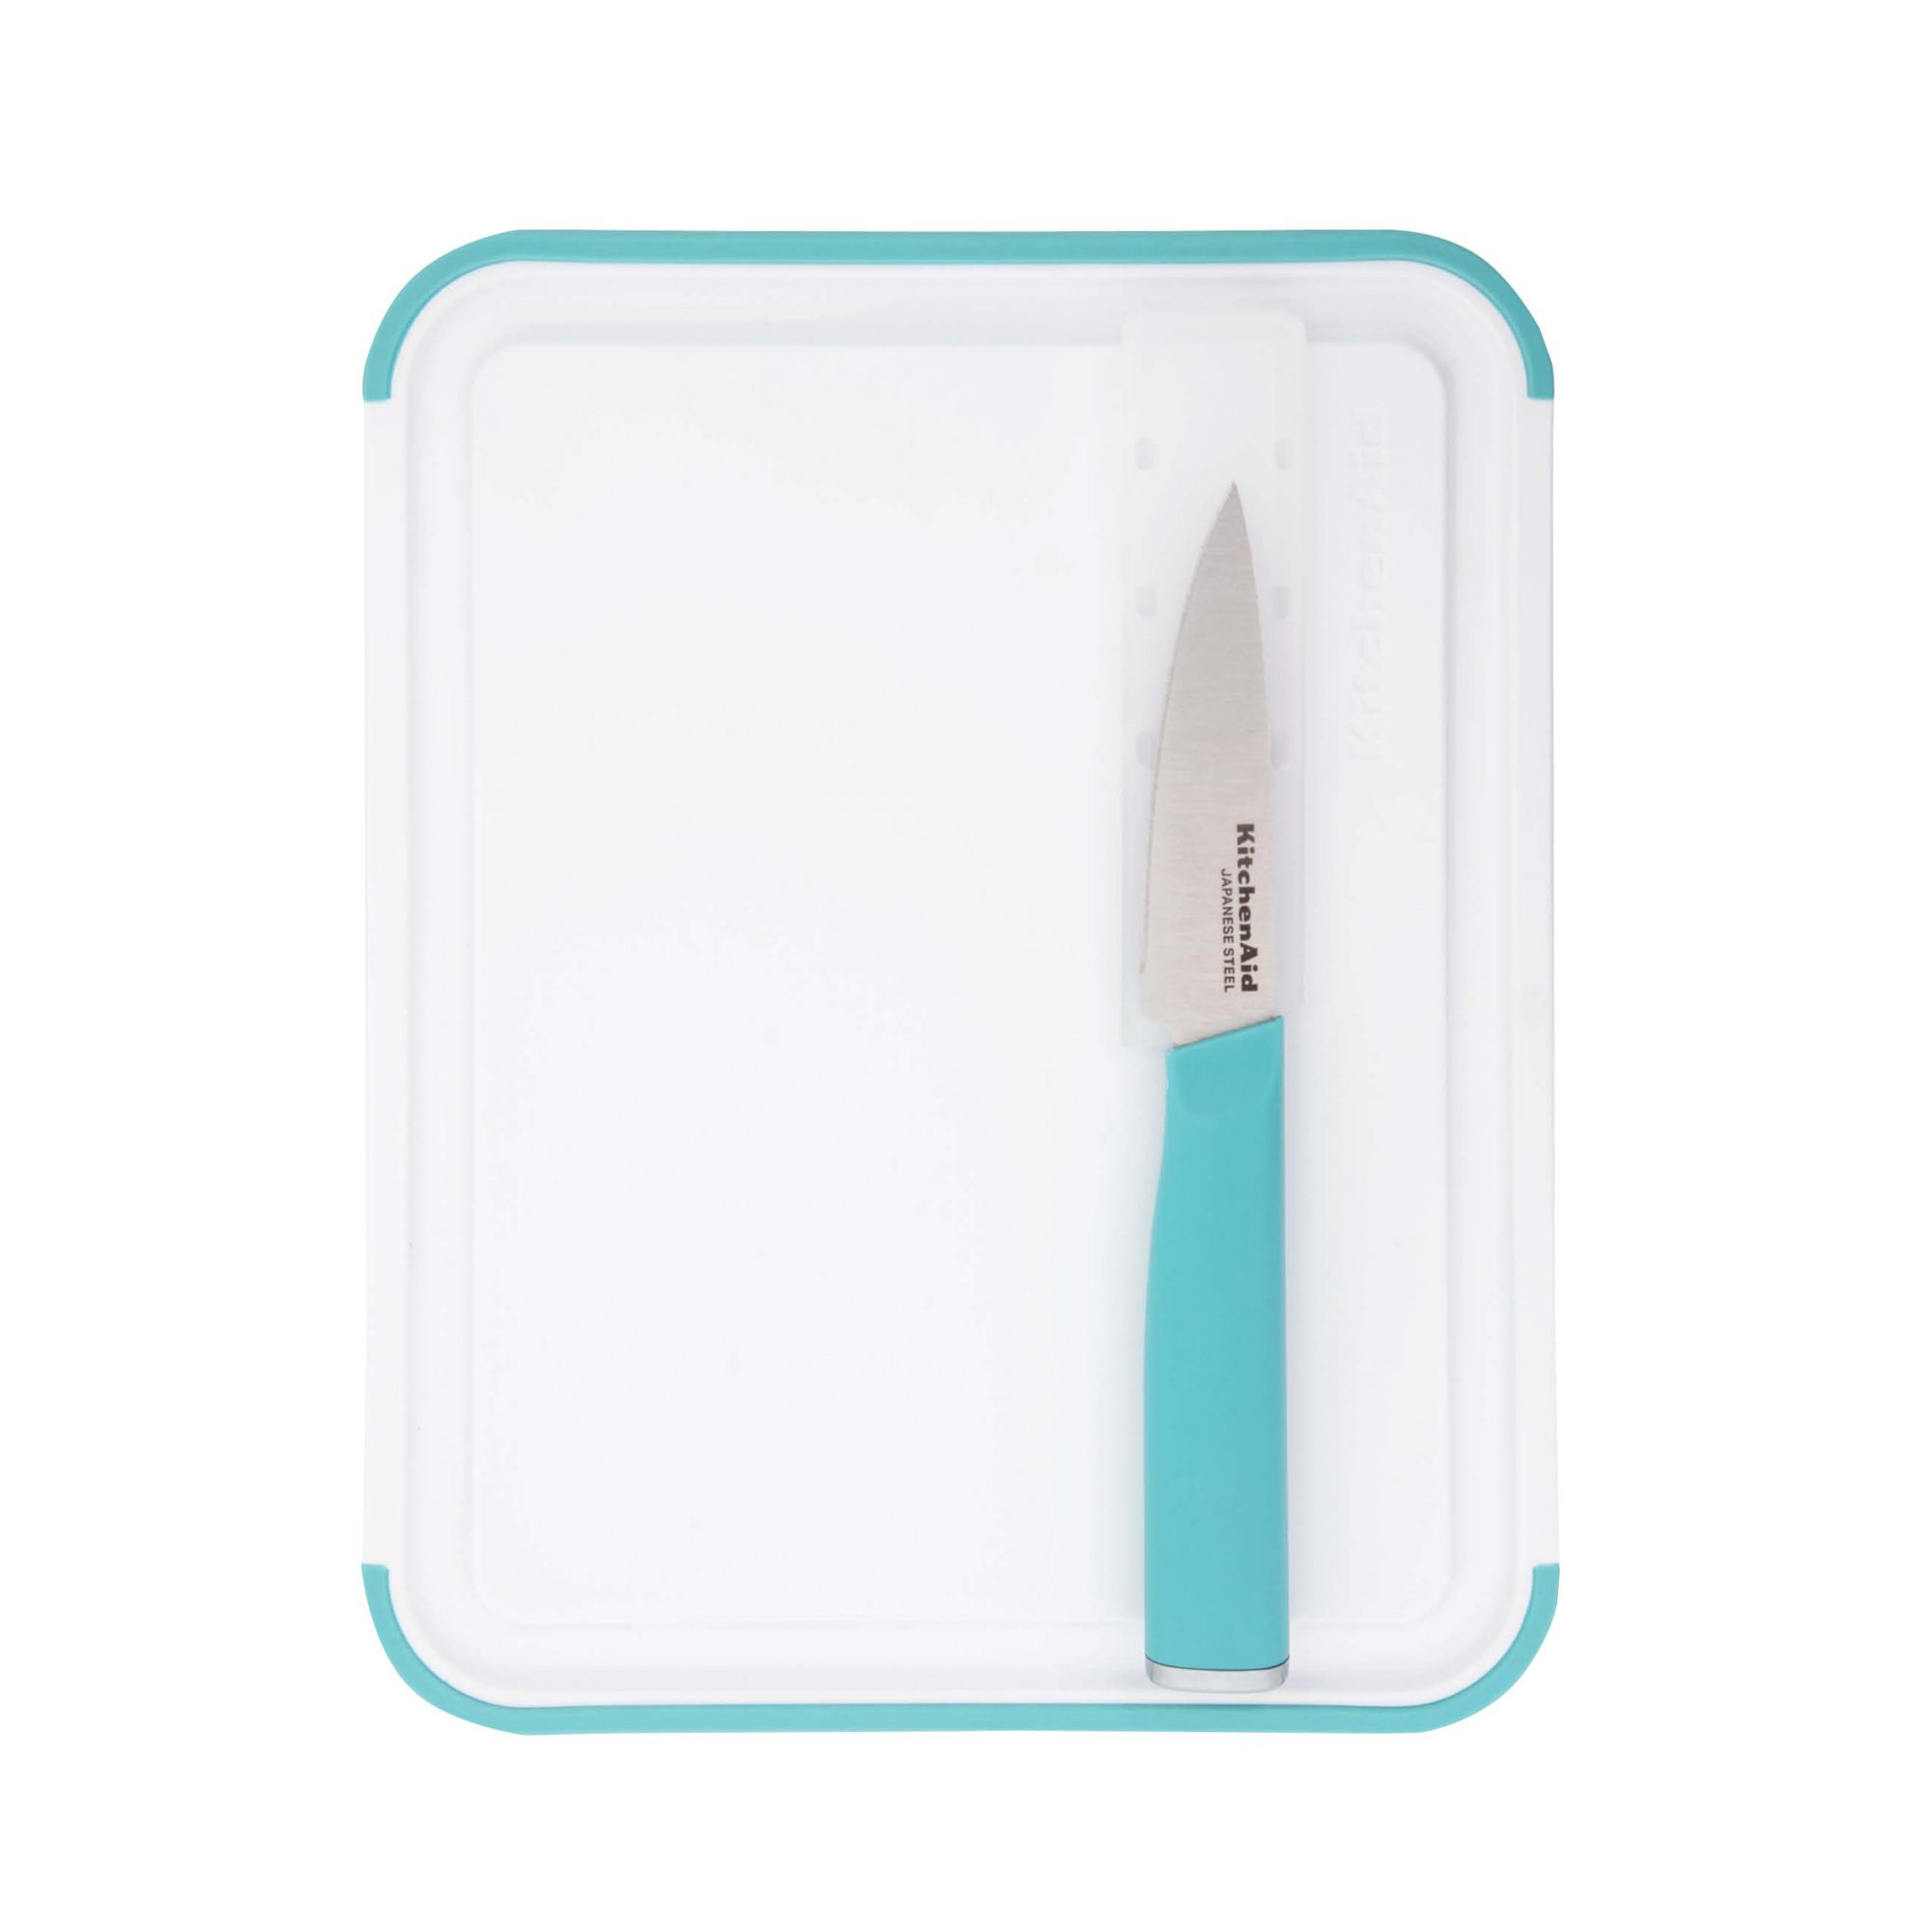 OXO Outdoor Cutting Board and Tray Set